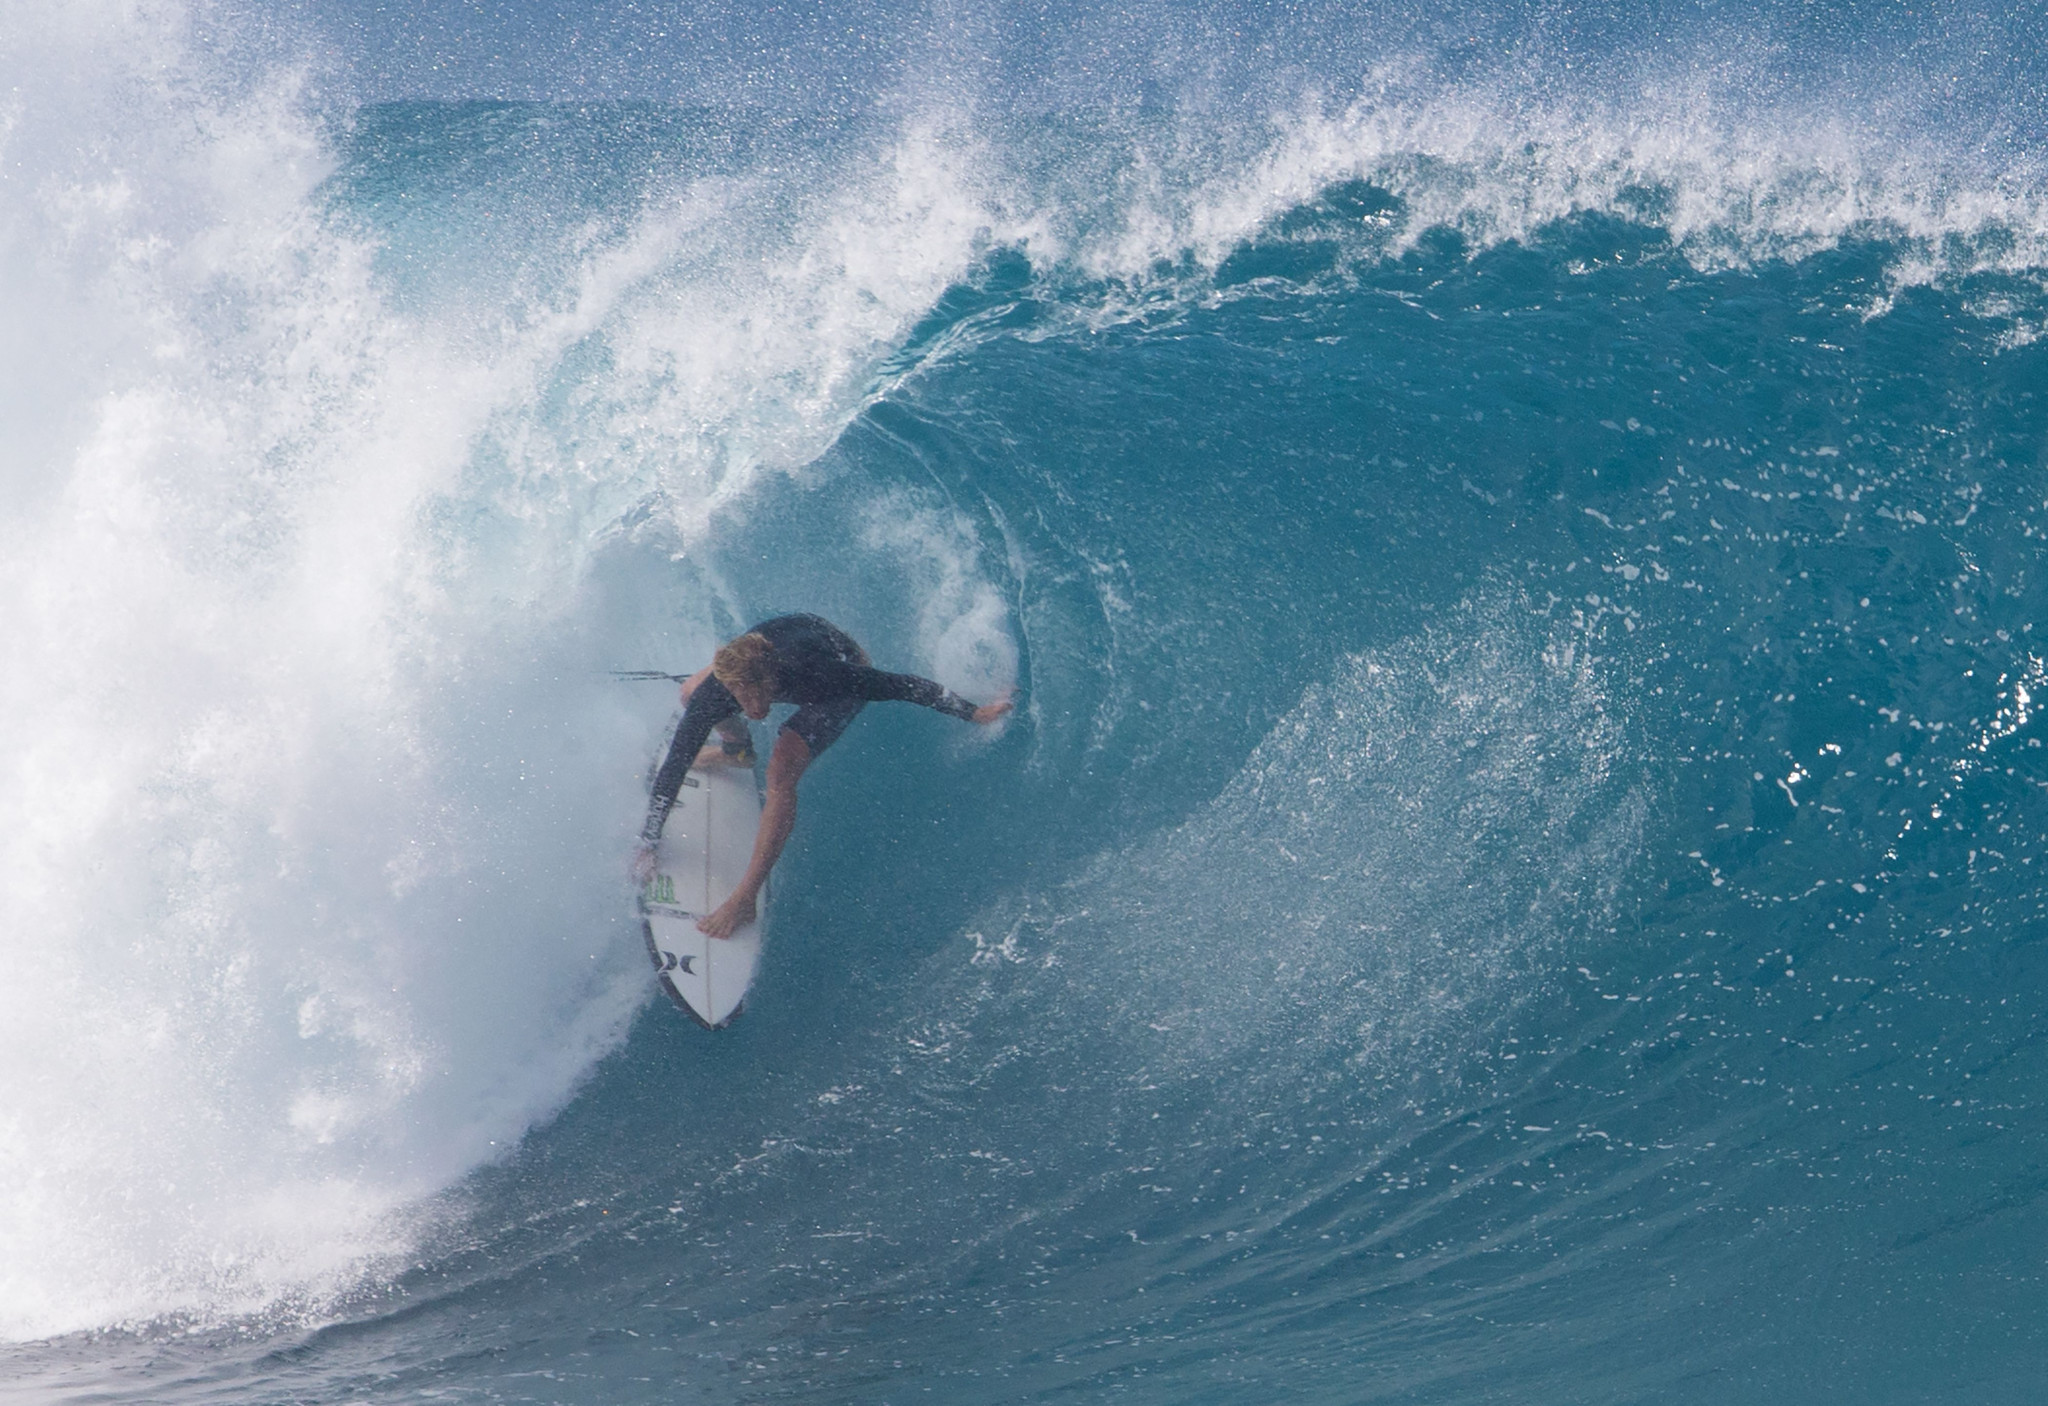 Florence and Robinson shine at season-opening WSL event at Pipeline